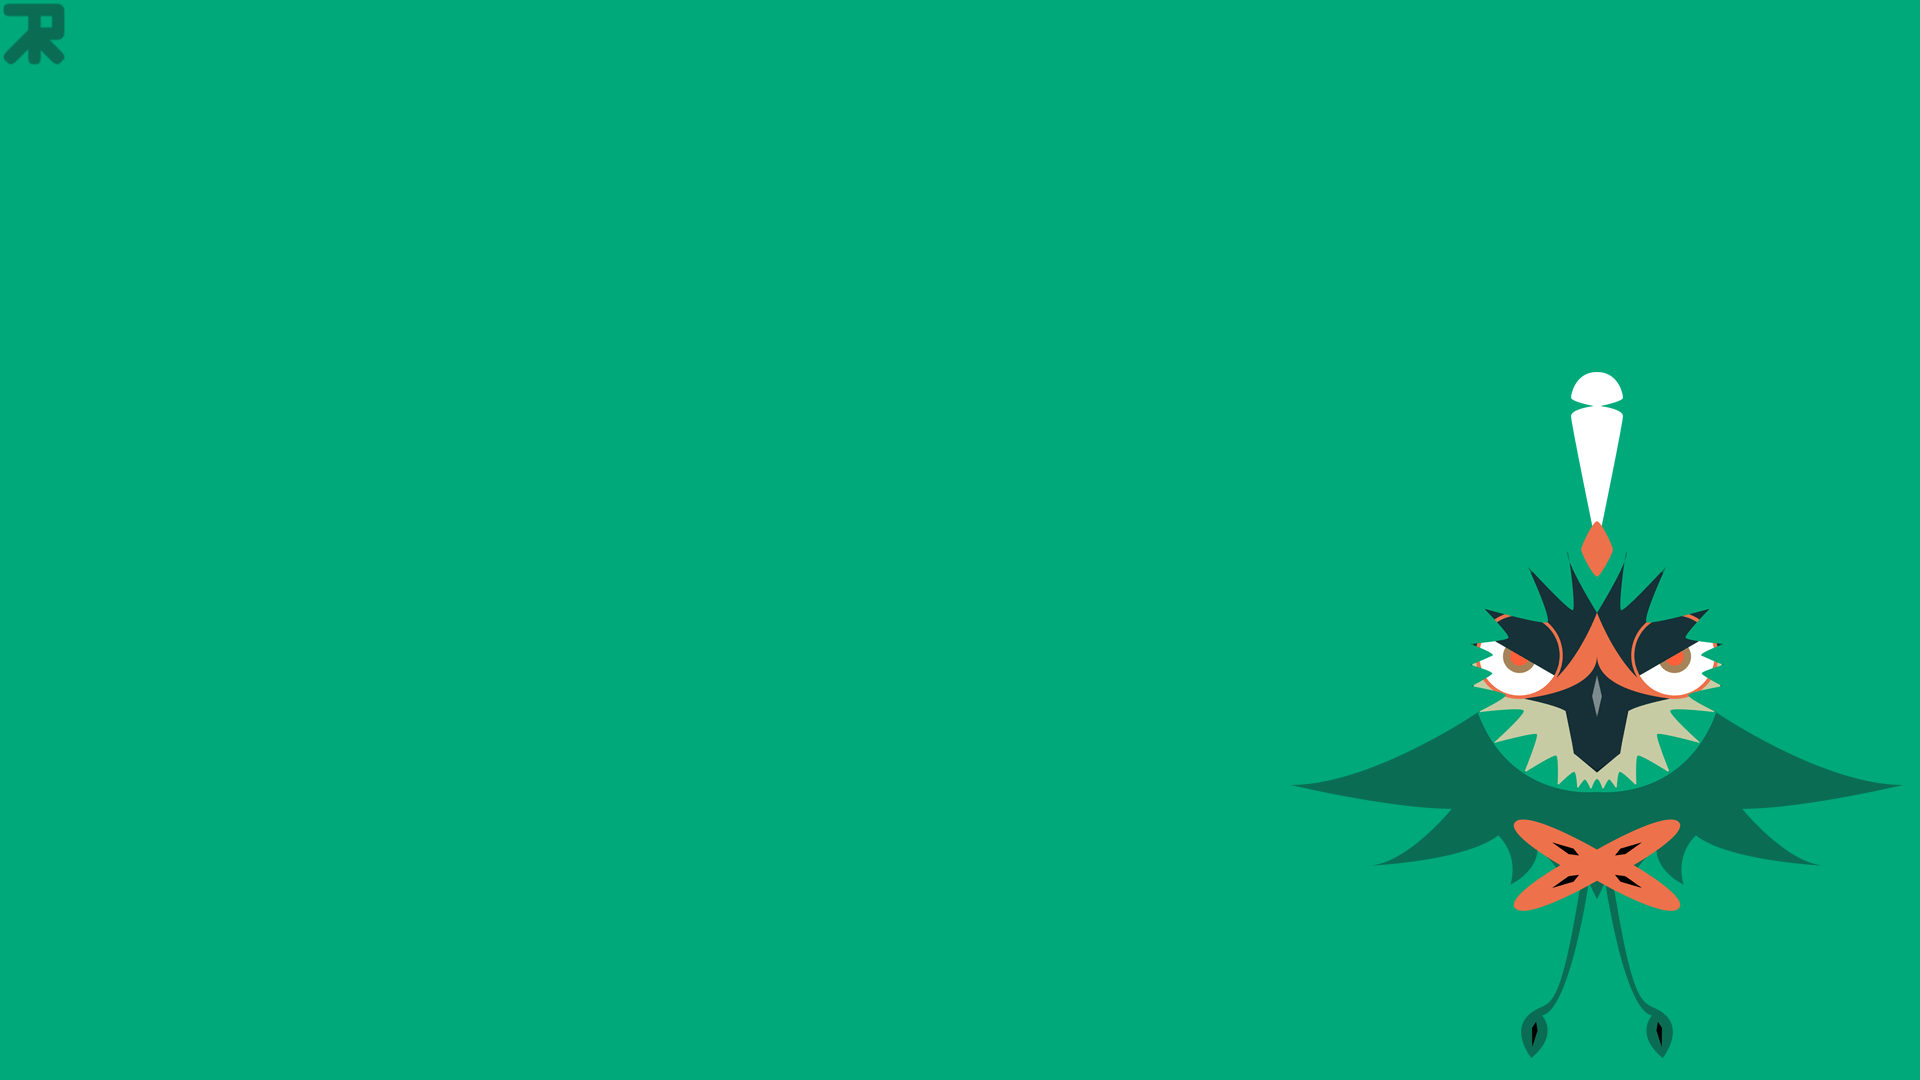 Since Everybody Likes Decidueye So Much, I Decided To Make A Free To